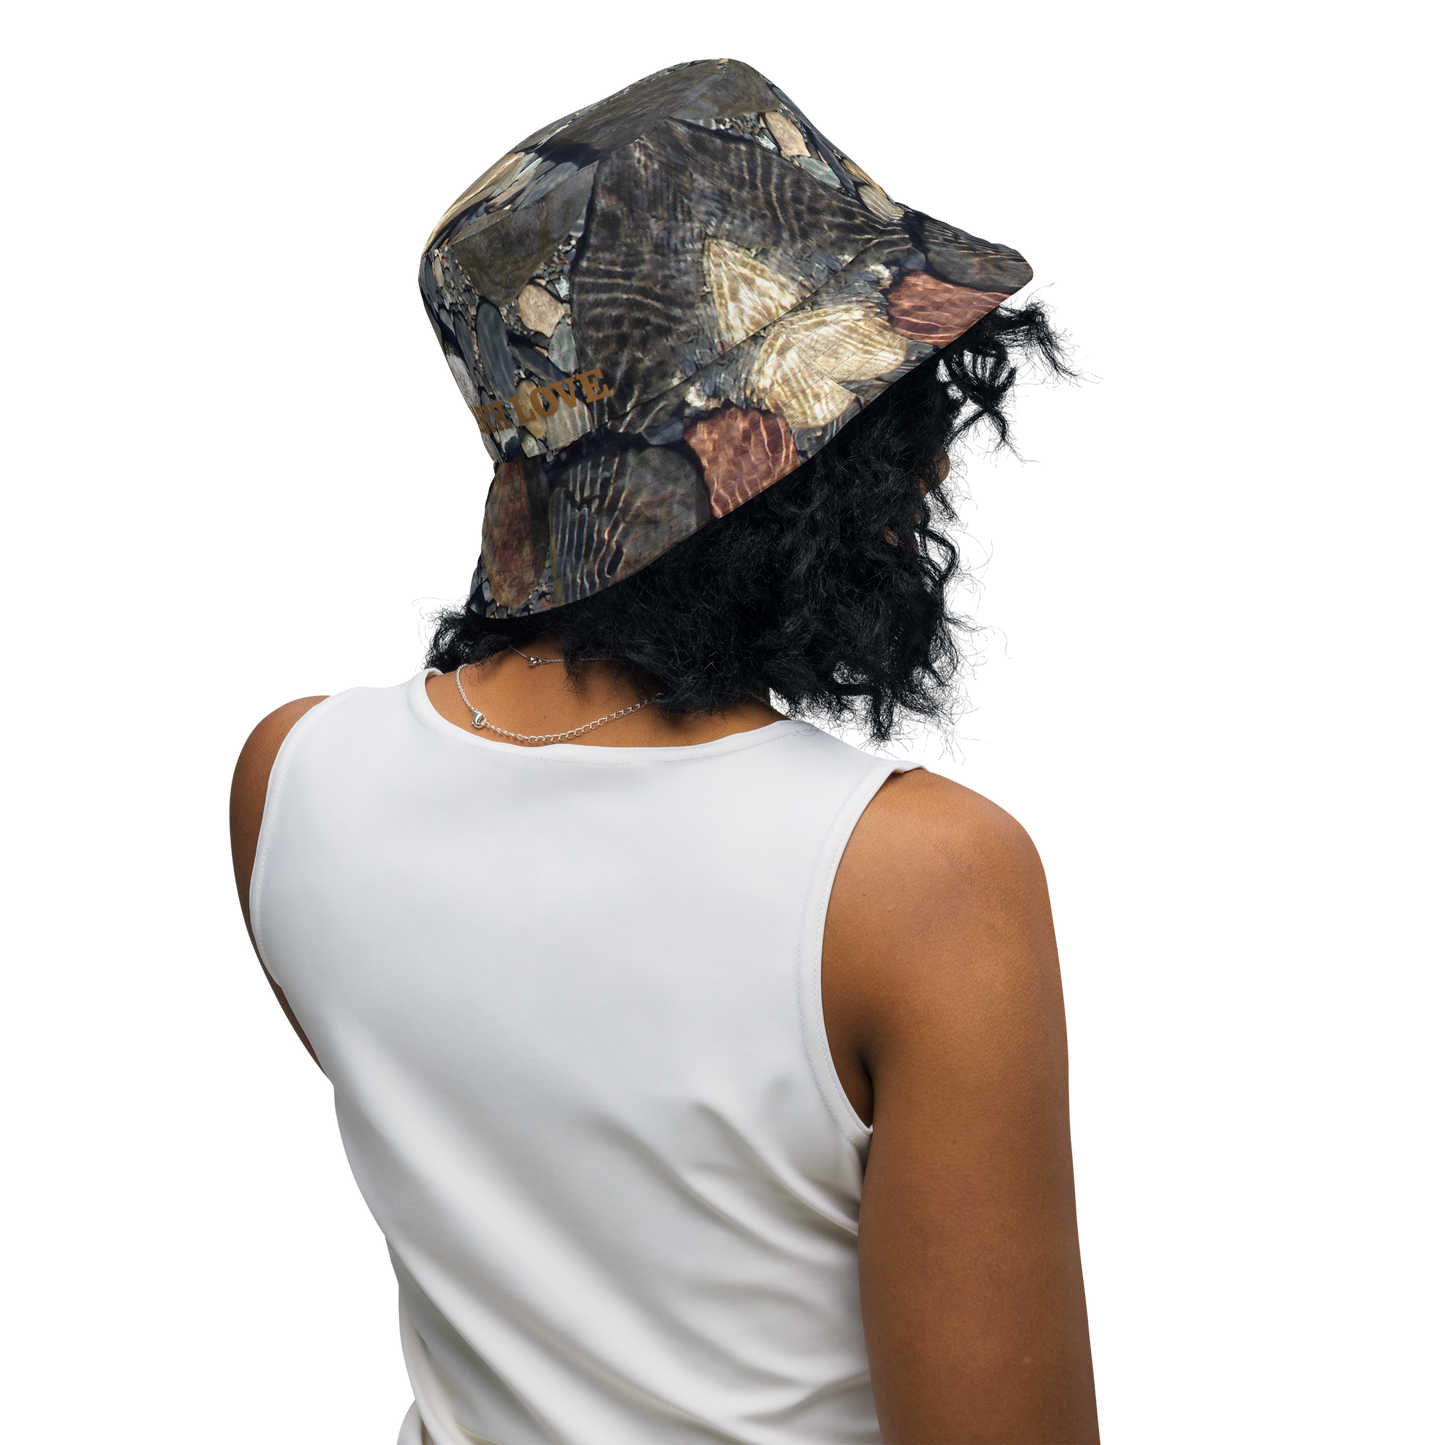 The EARTH LOVE Collection - "Rock Renaissance" Design Premium Reversible Bucket Hat - Dark Gray Inside - Beach Hat, Gifts for Her, Gifts for Him